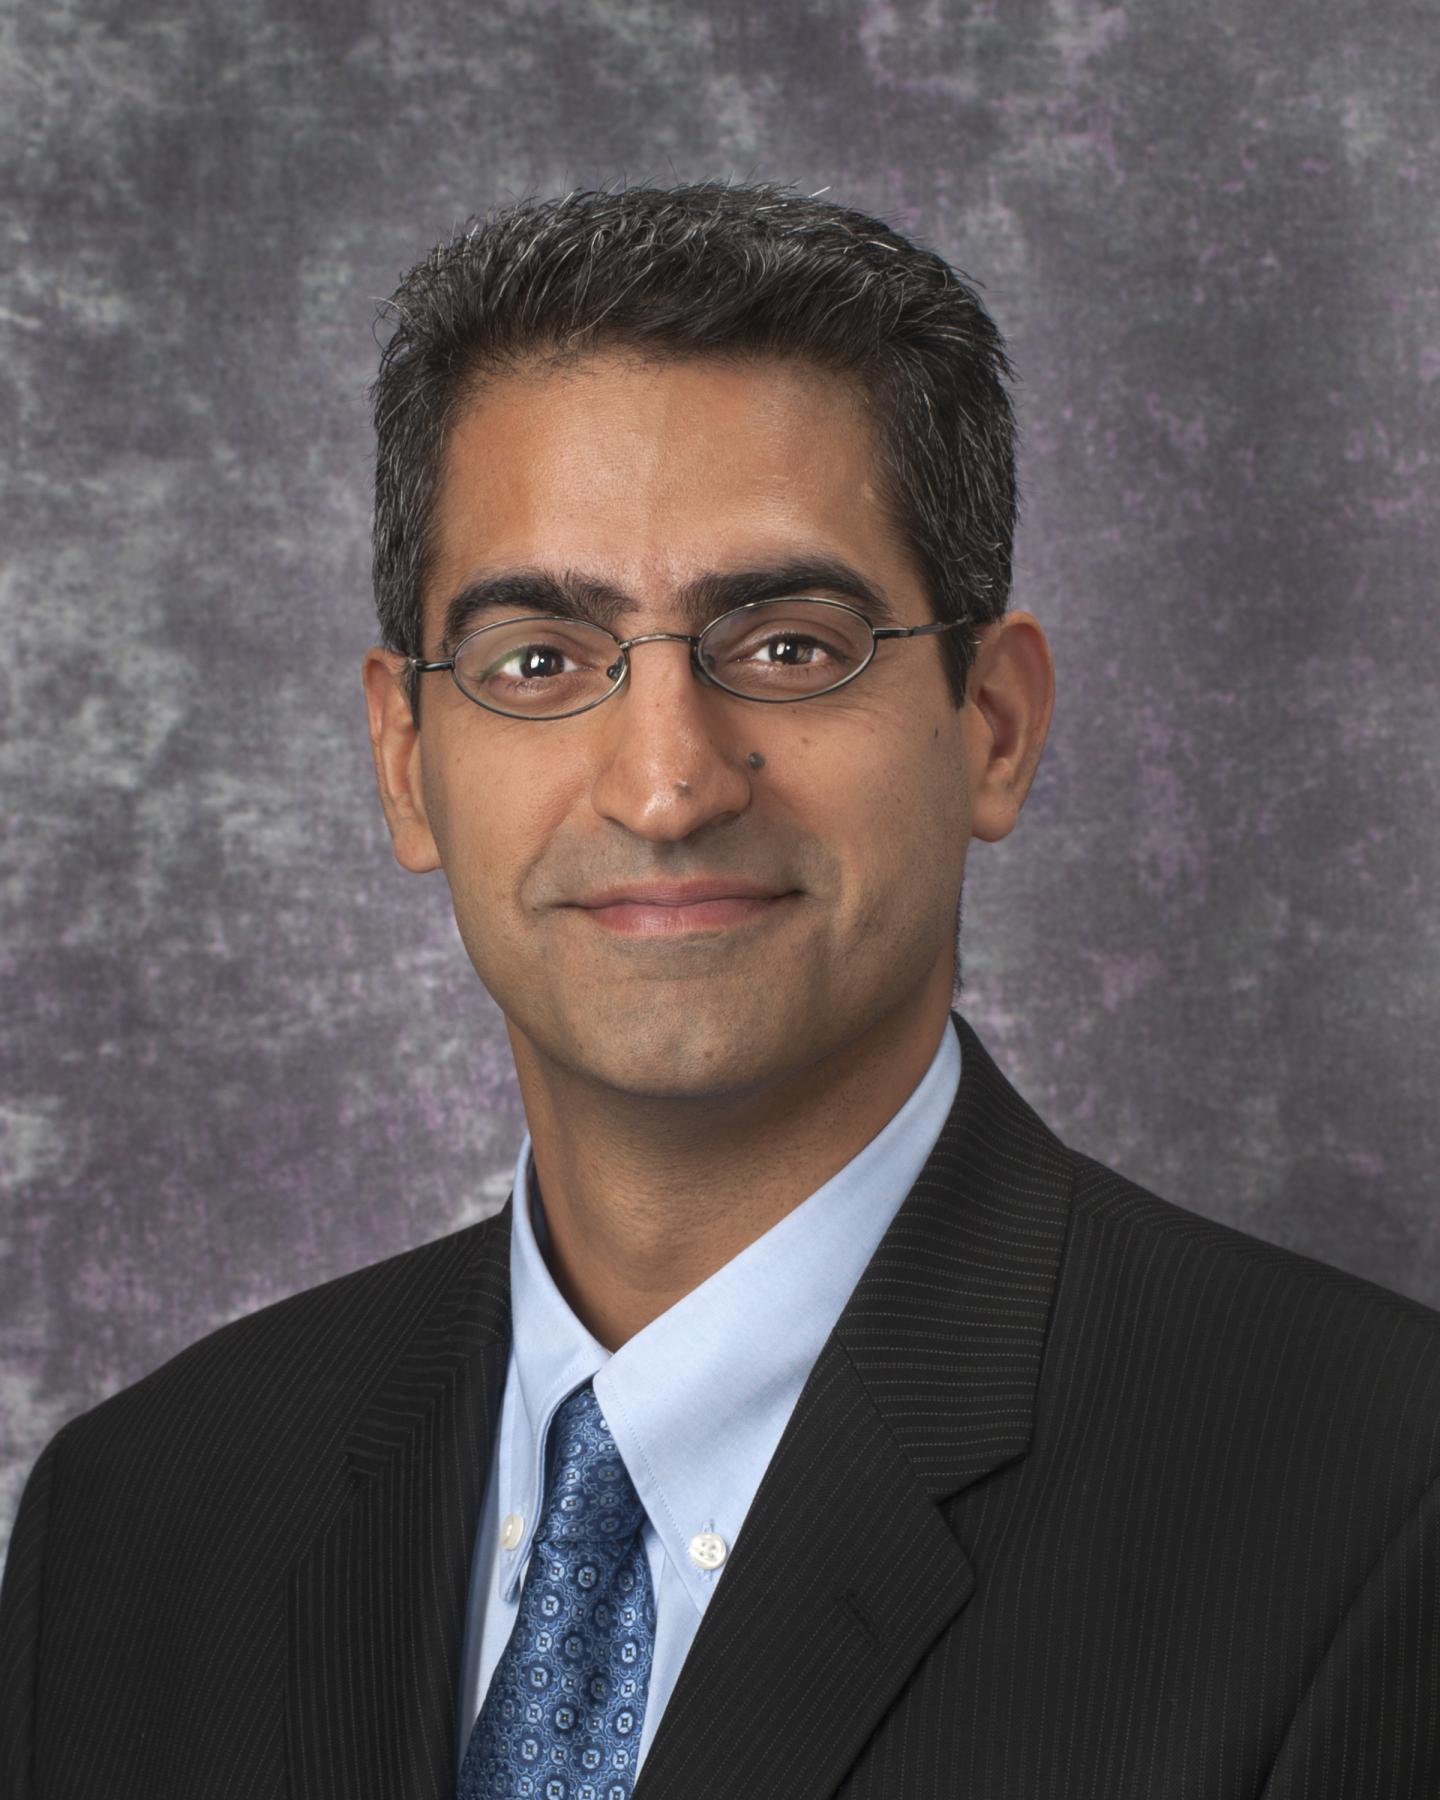 Headshot of Inderpal (Netu) S. Sarkaria, MD, from the University of Pittsburgh Medical Center in Pennsylvania